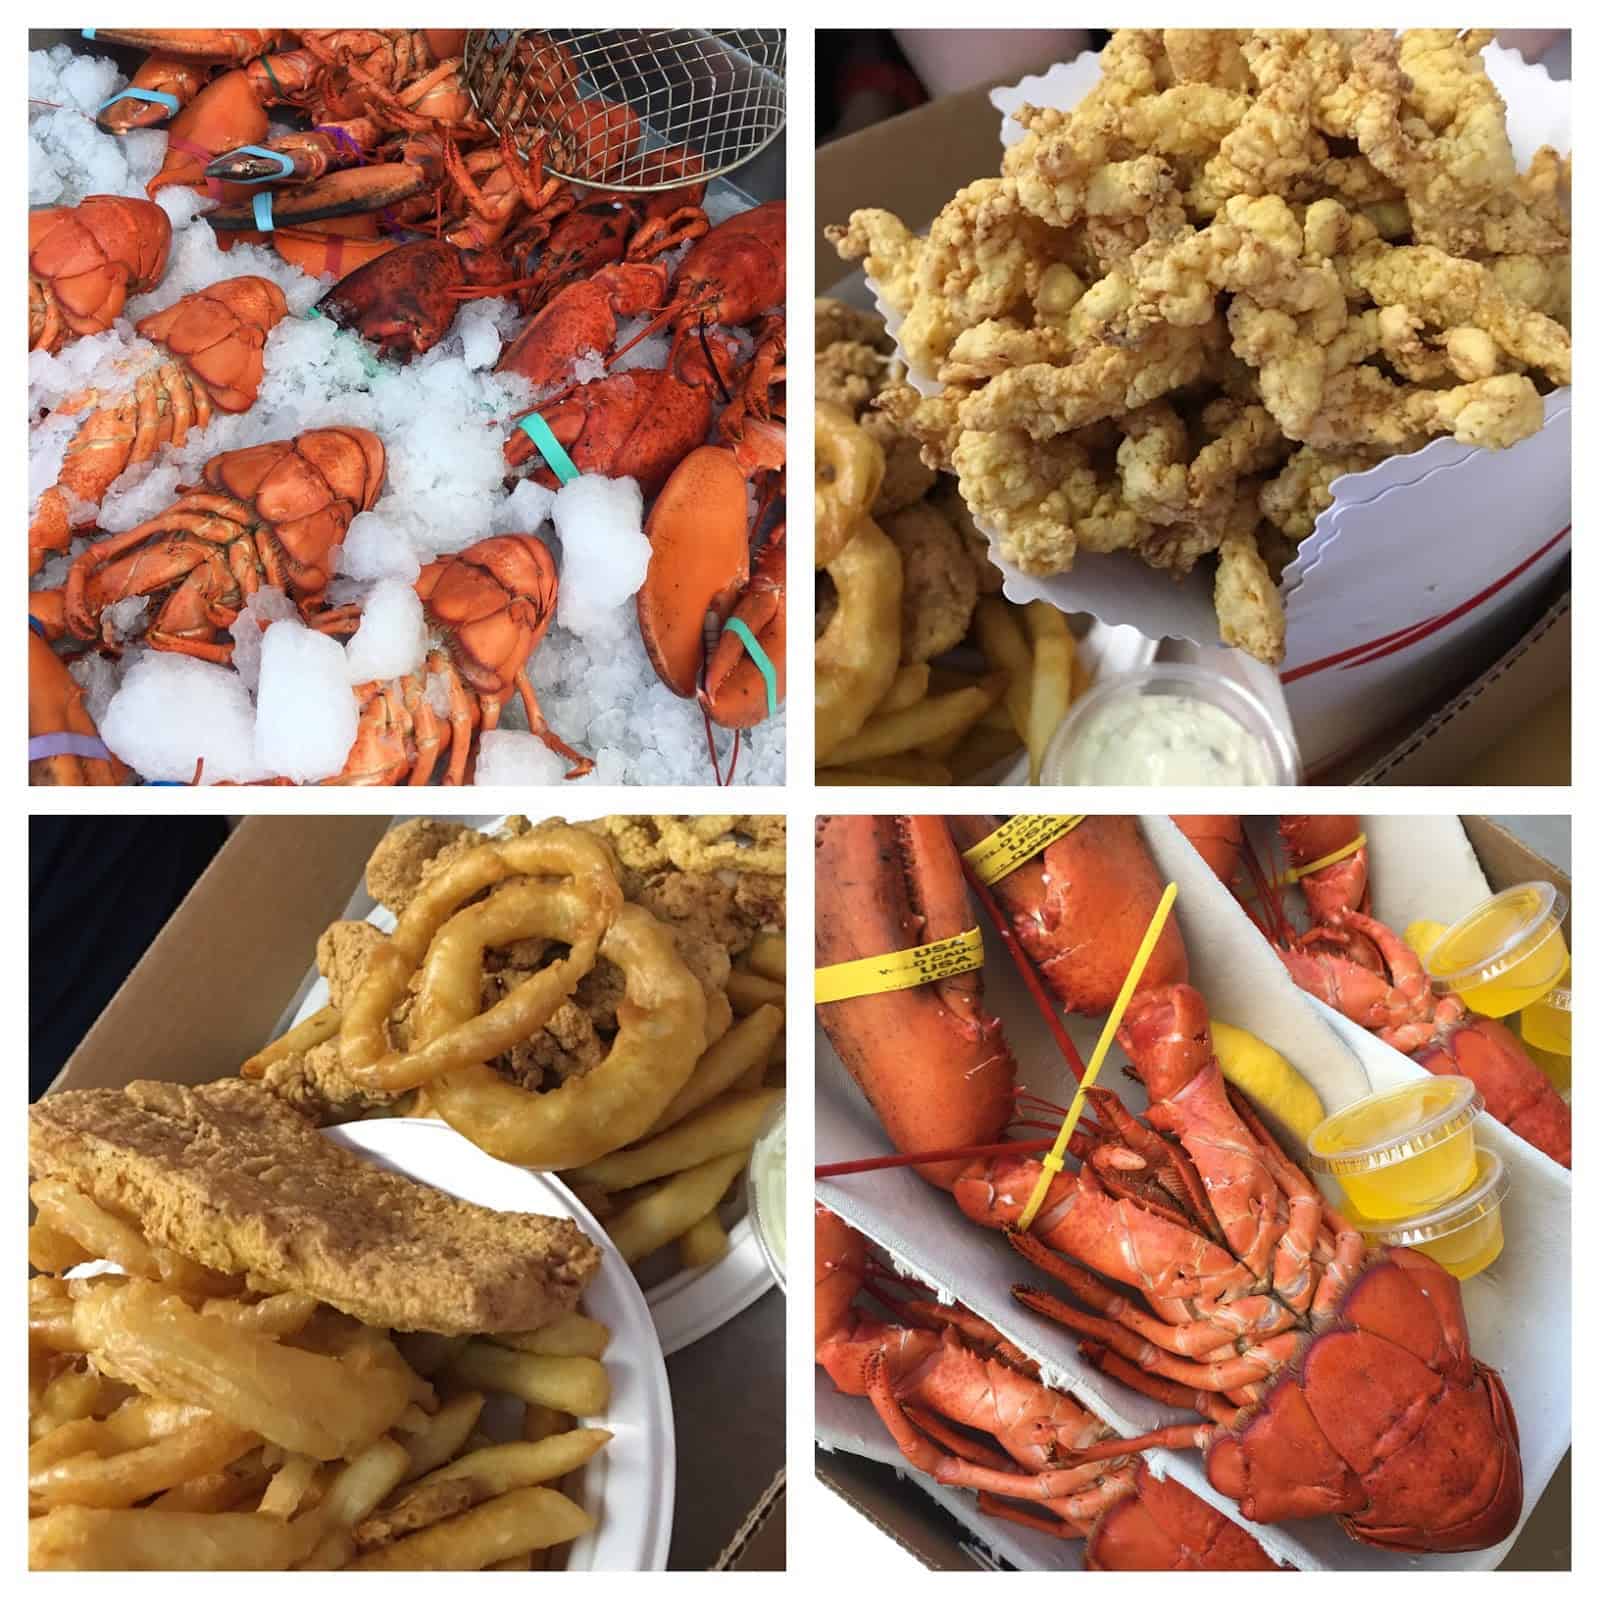 Collage of steam lobsters, fried clams, onion rings, and fries